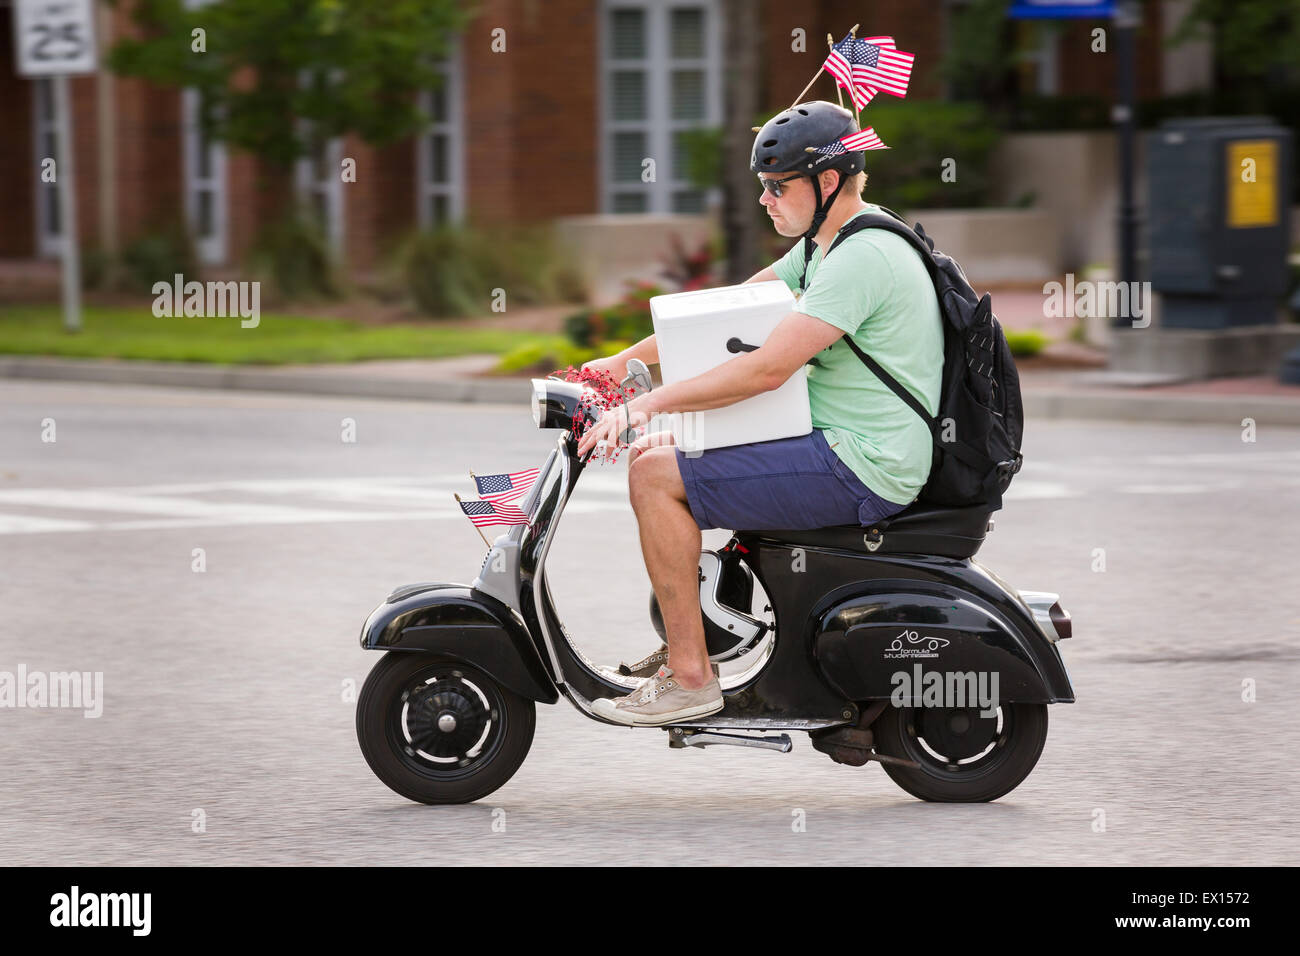 A man carrying a cooler on his scooter rides decorated with American flags during the Daniel Island Independence Day parade July 3, 2015 in Charleston, South Carolina. Stock Photo